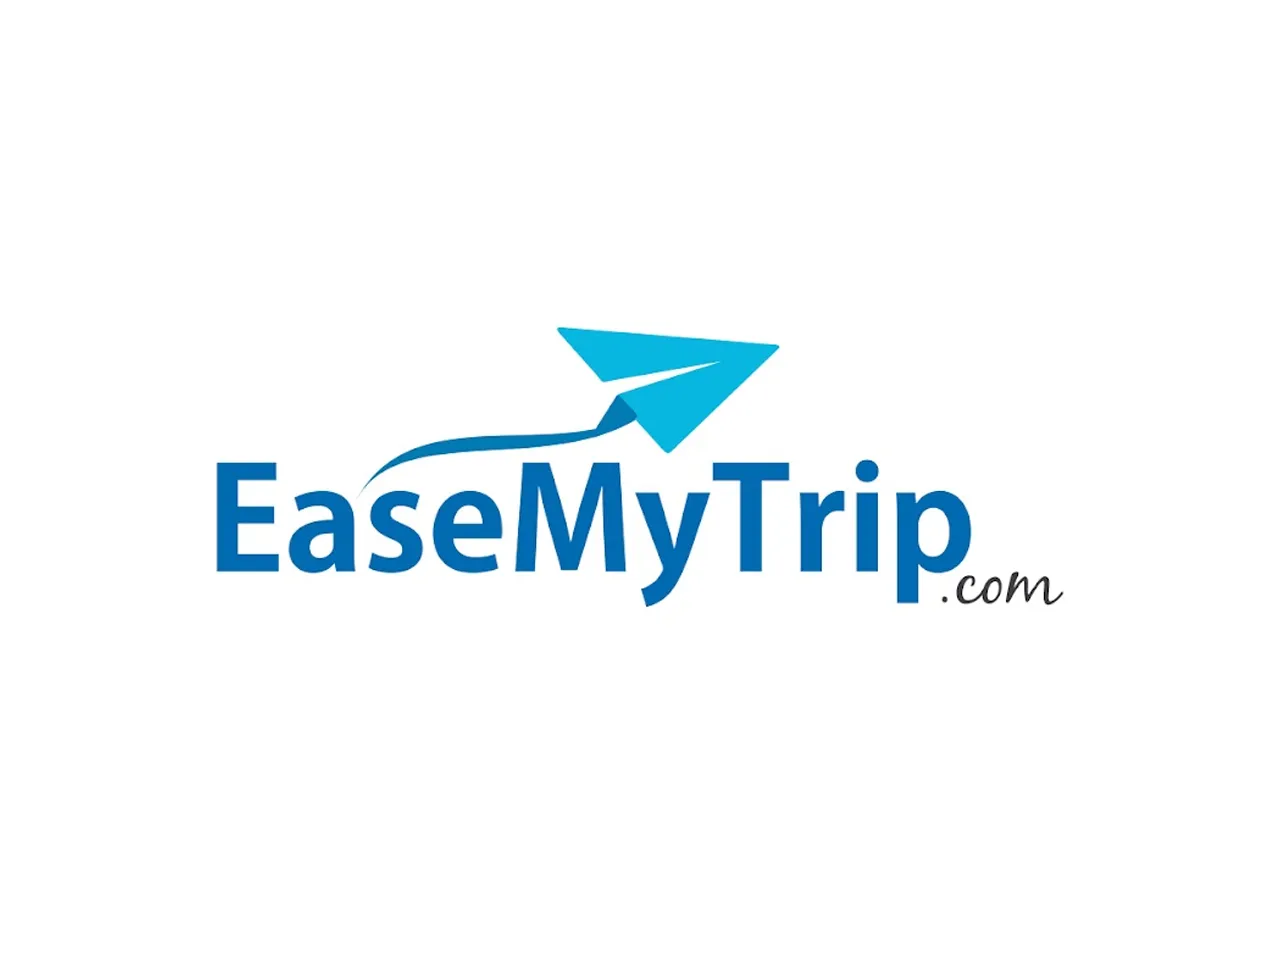 EaseMyTrip expands into Jalgaon, launches its first store in the city!